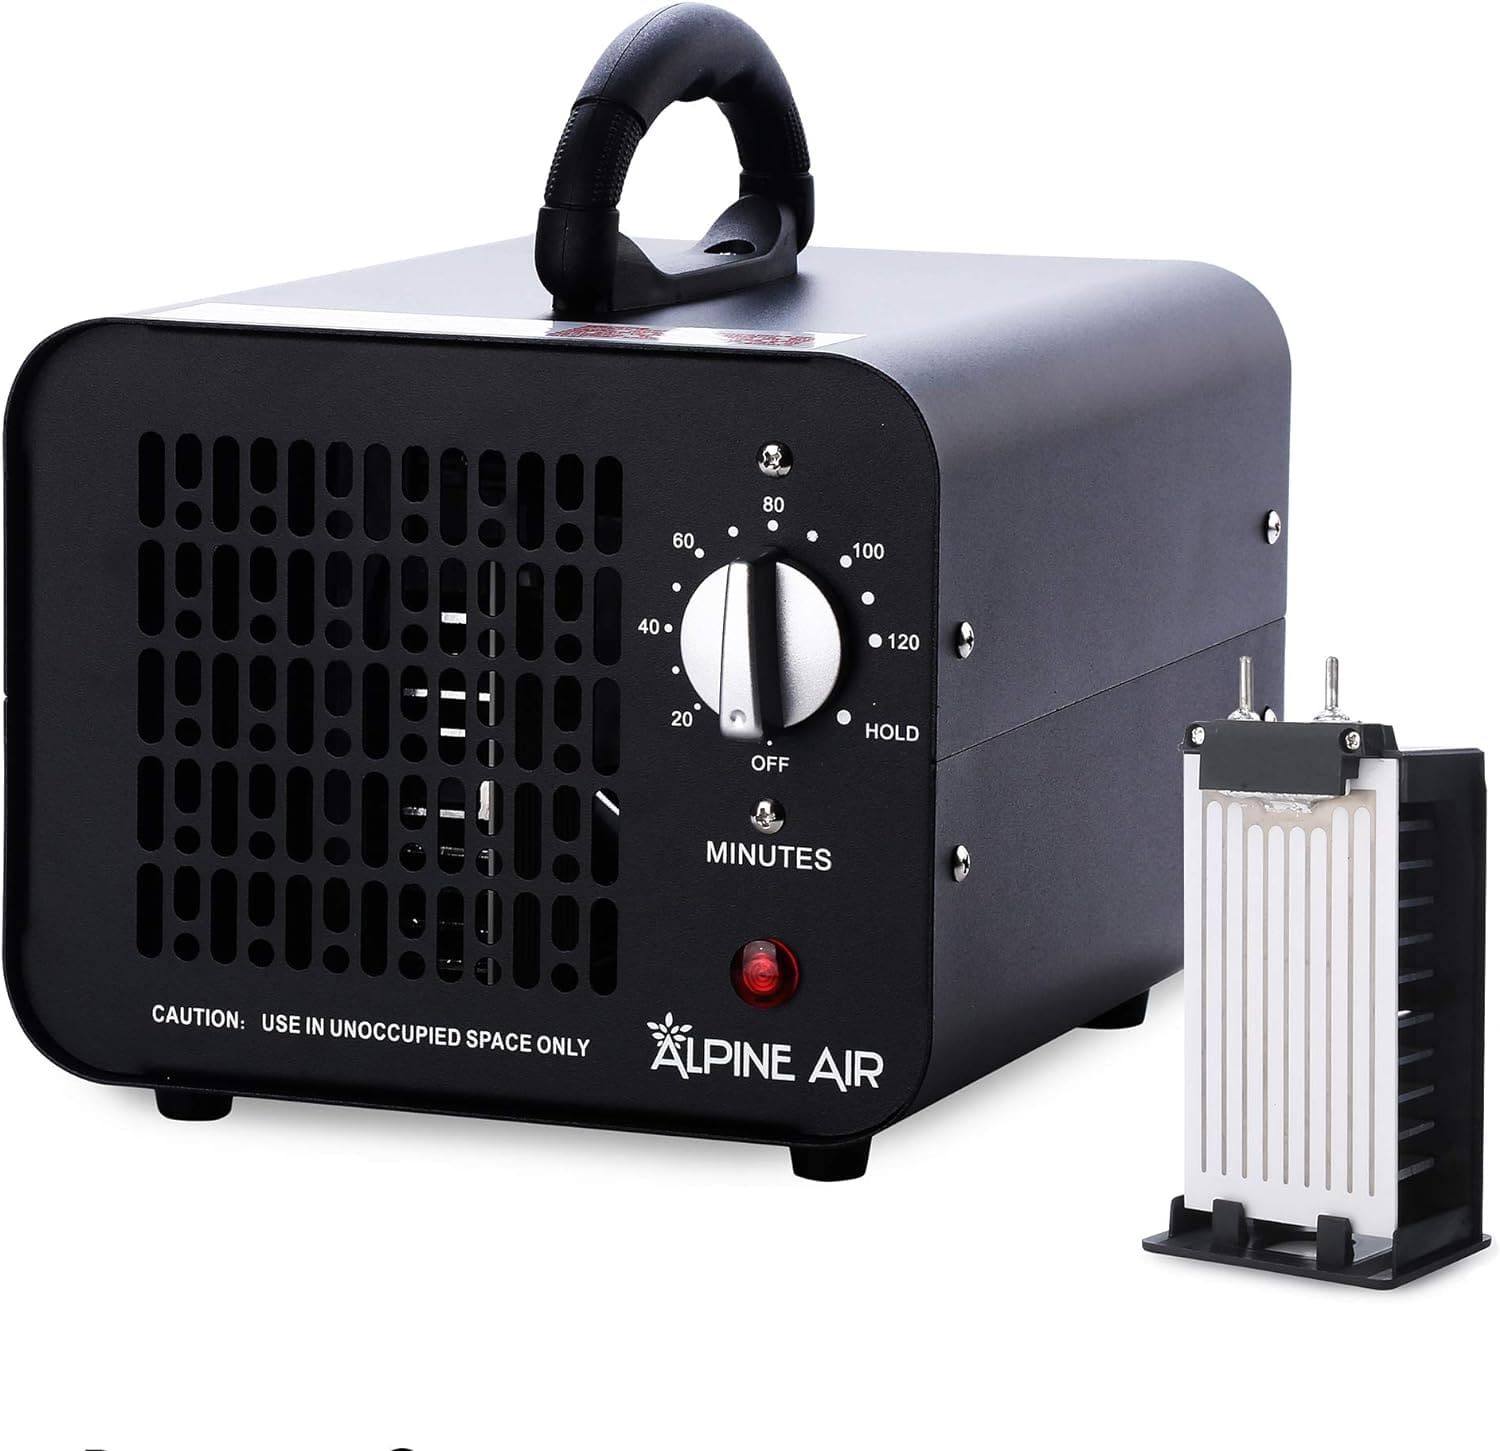 Alpine Air Commercial Ozone Generator Review